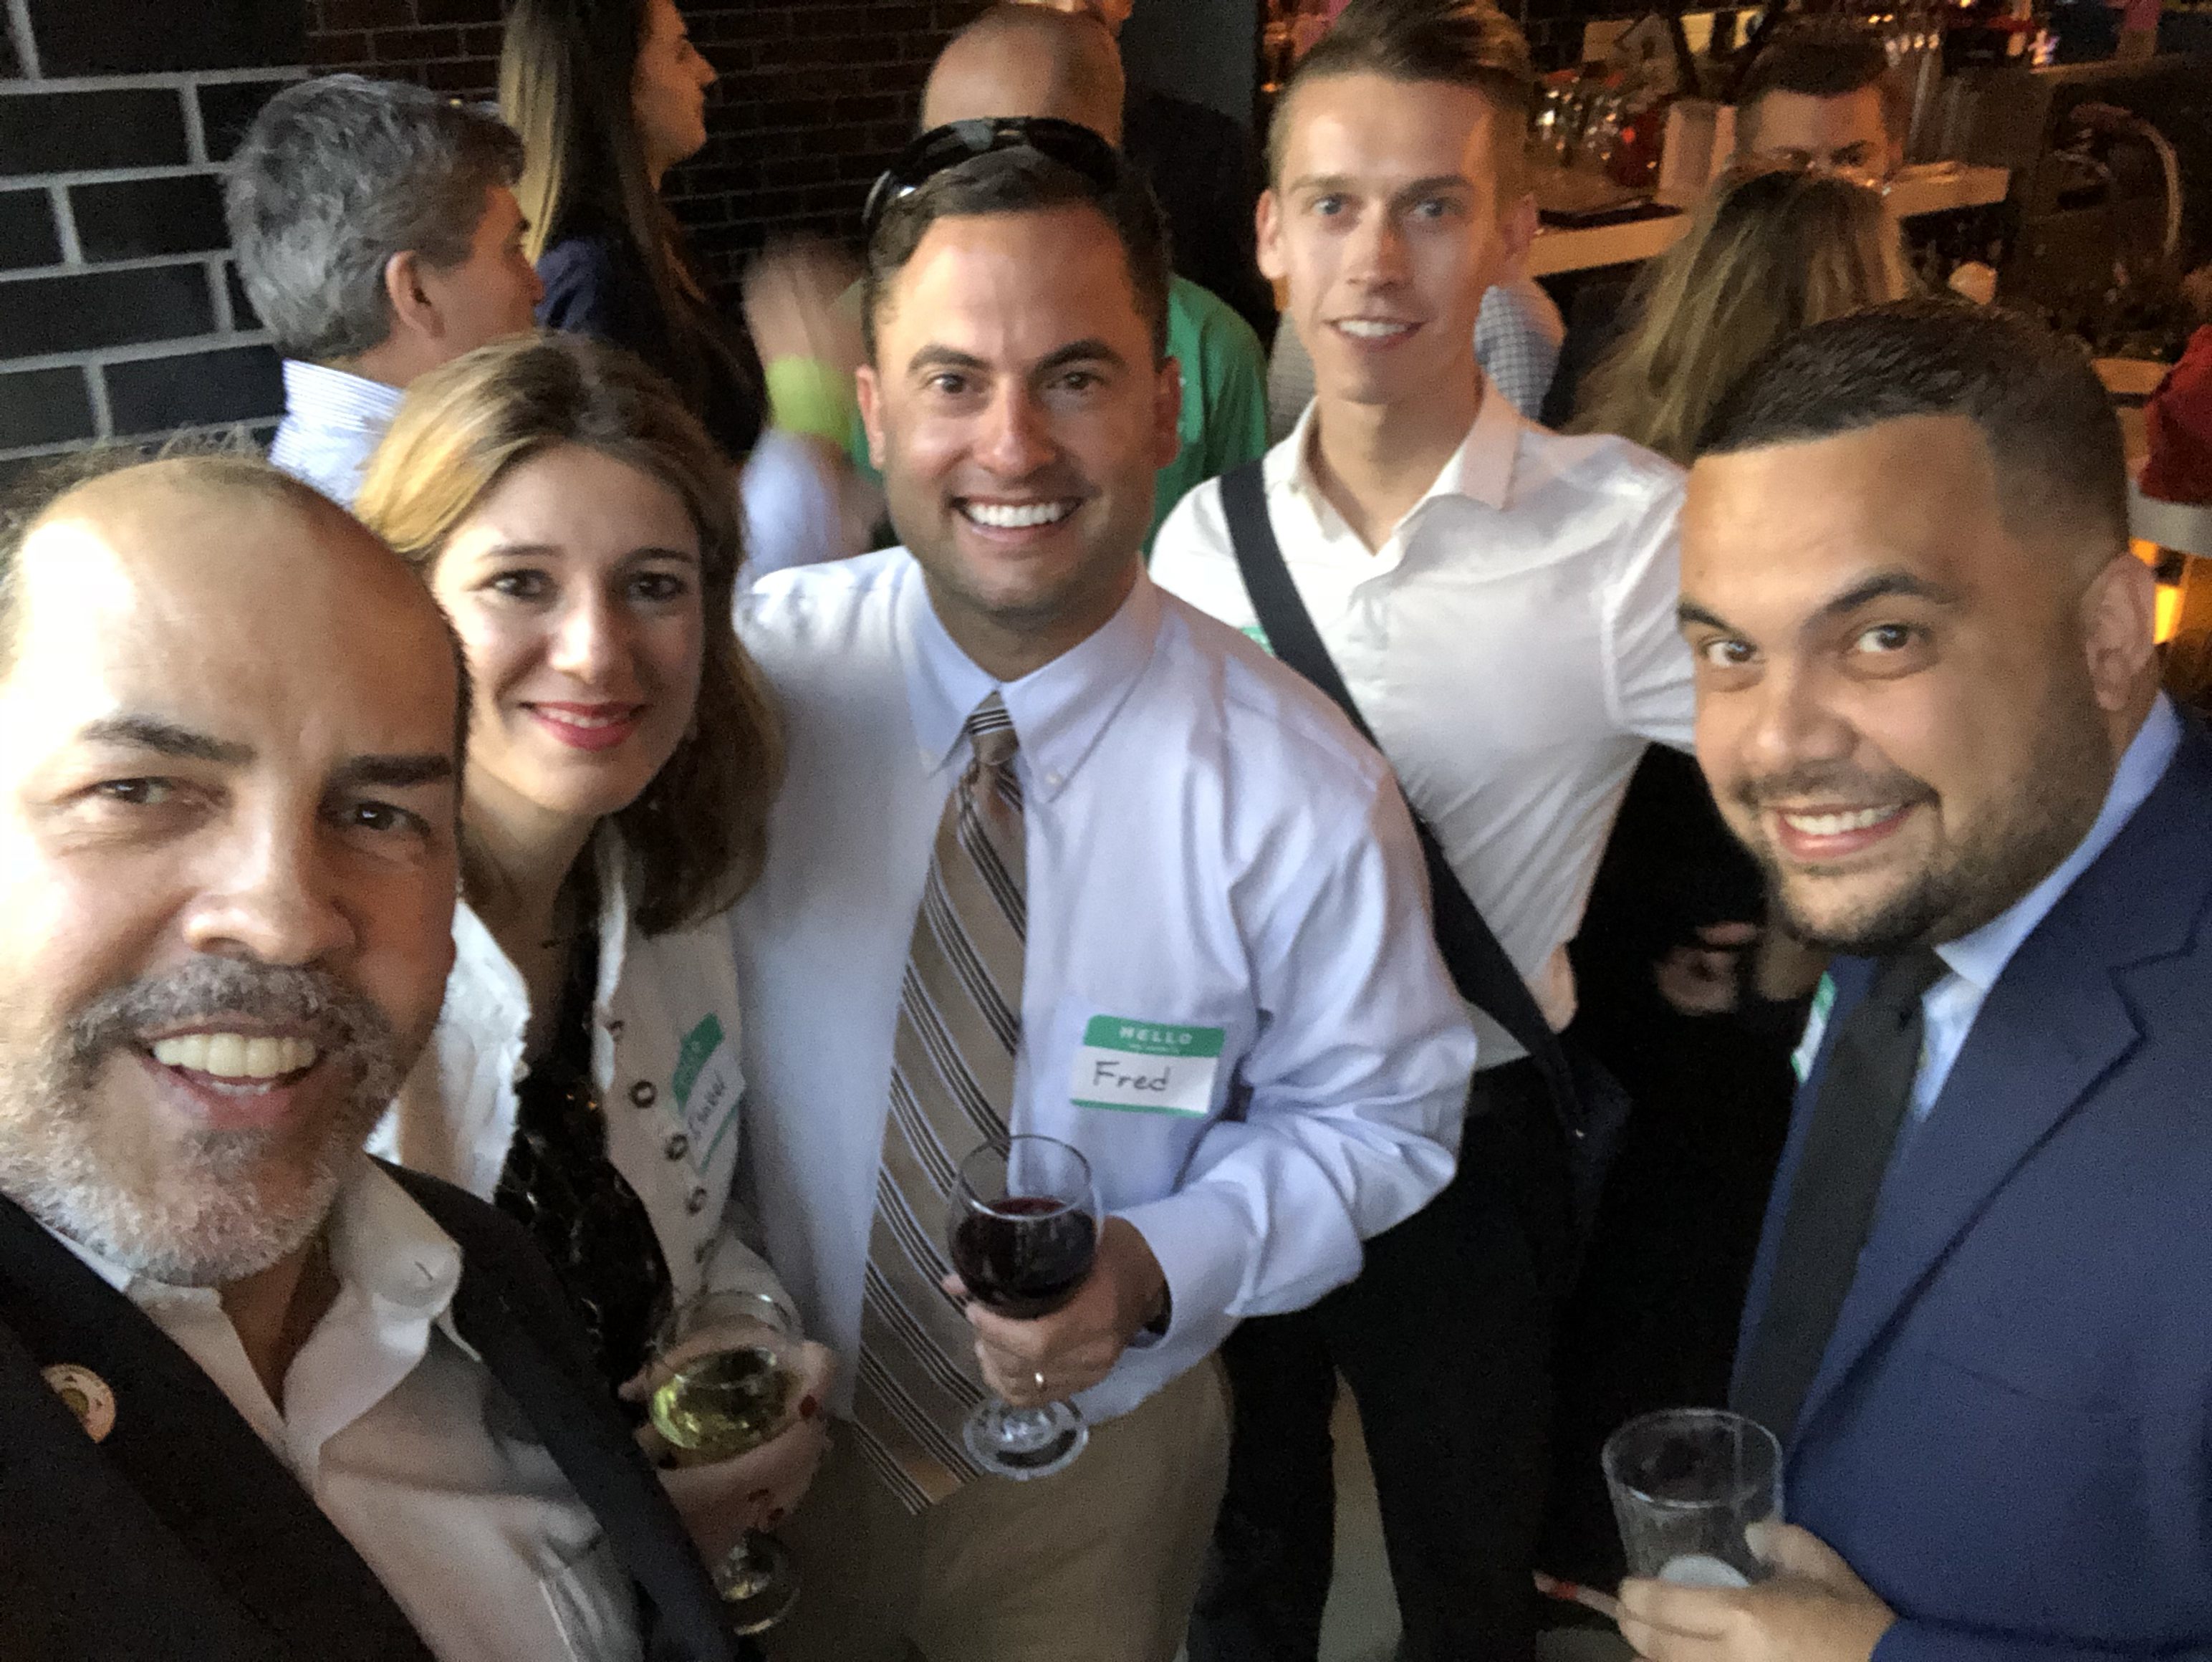 Group Selfie with members at King's Bowl Business Networking.